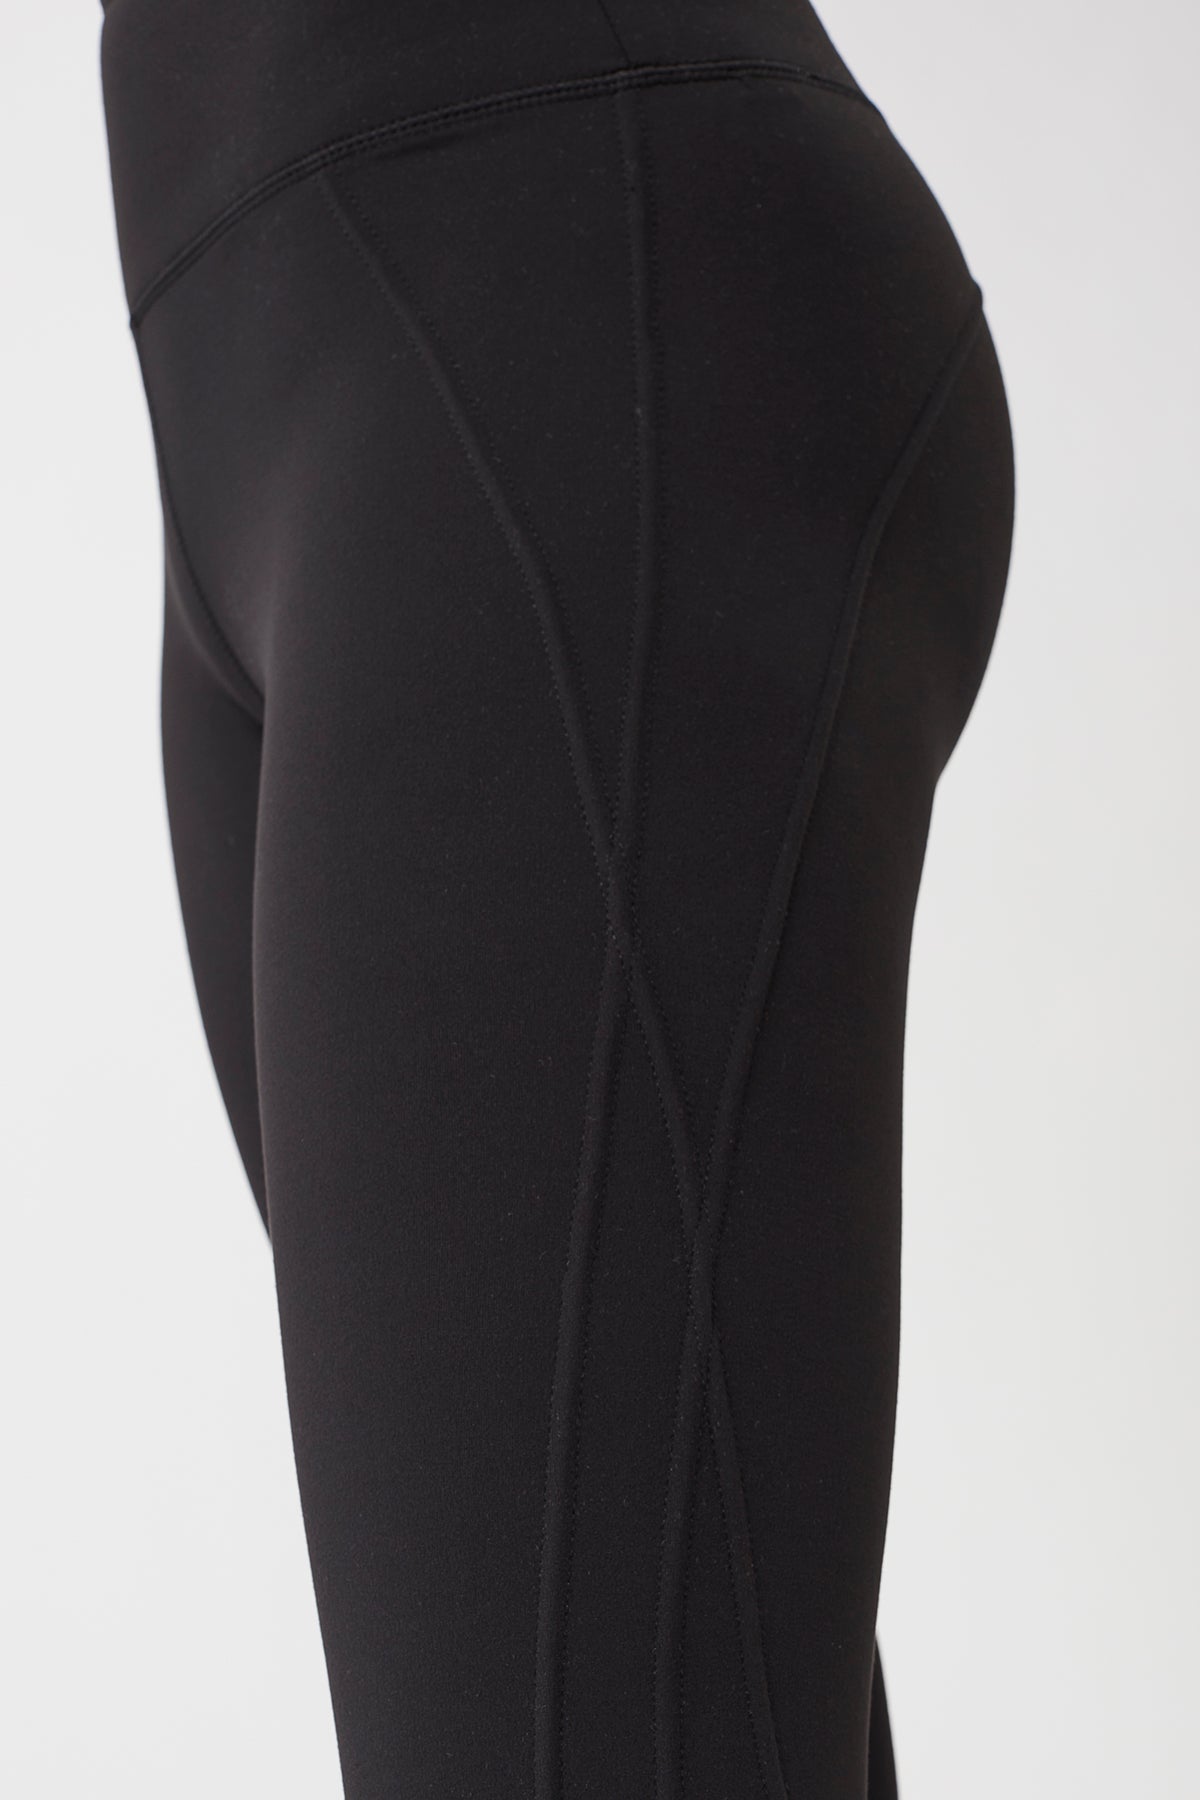 Yoga Wear out of recycled polyester